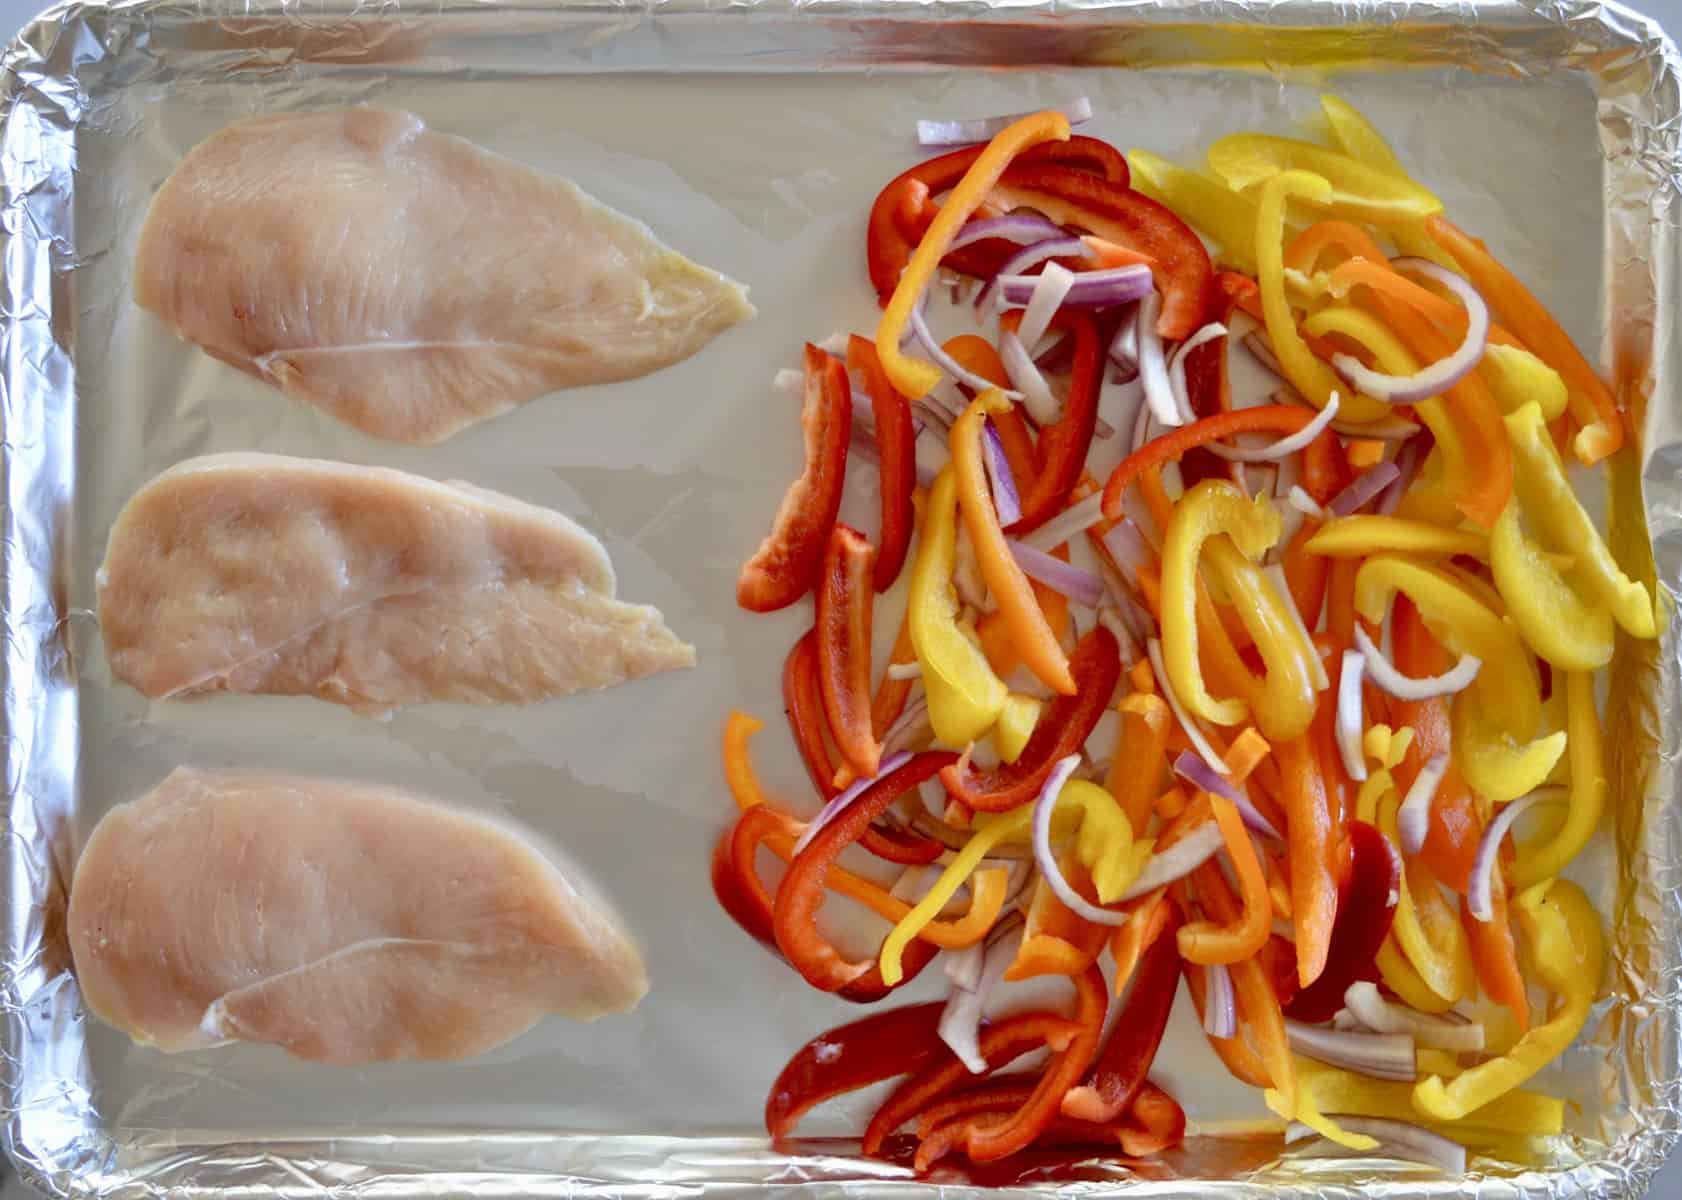 cook the chicken and bell peppers on a foil-lined baking sheet